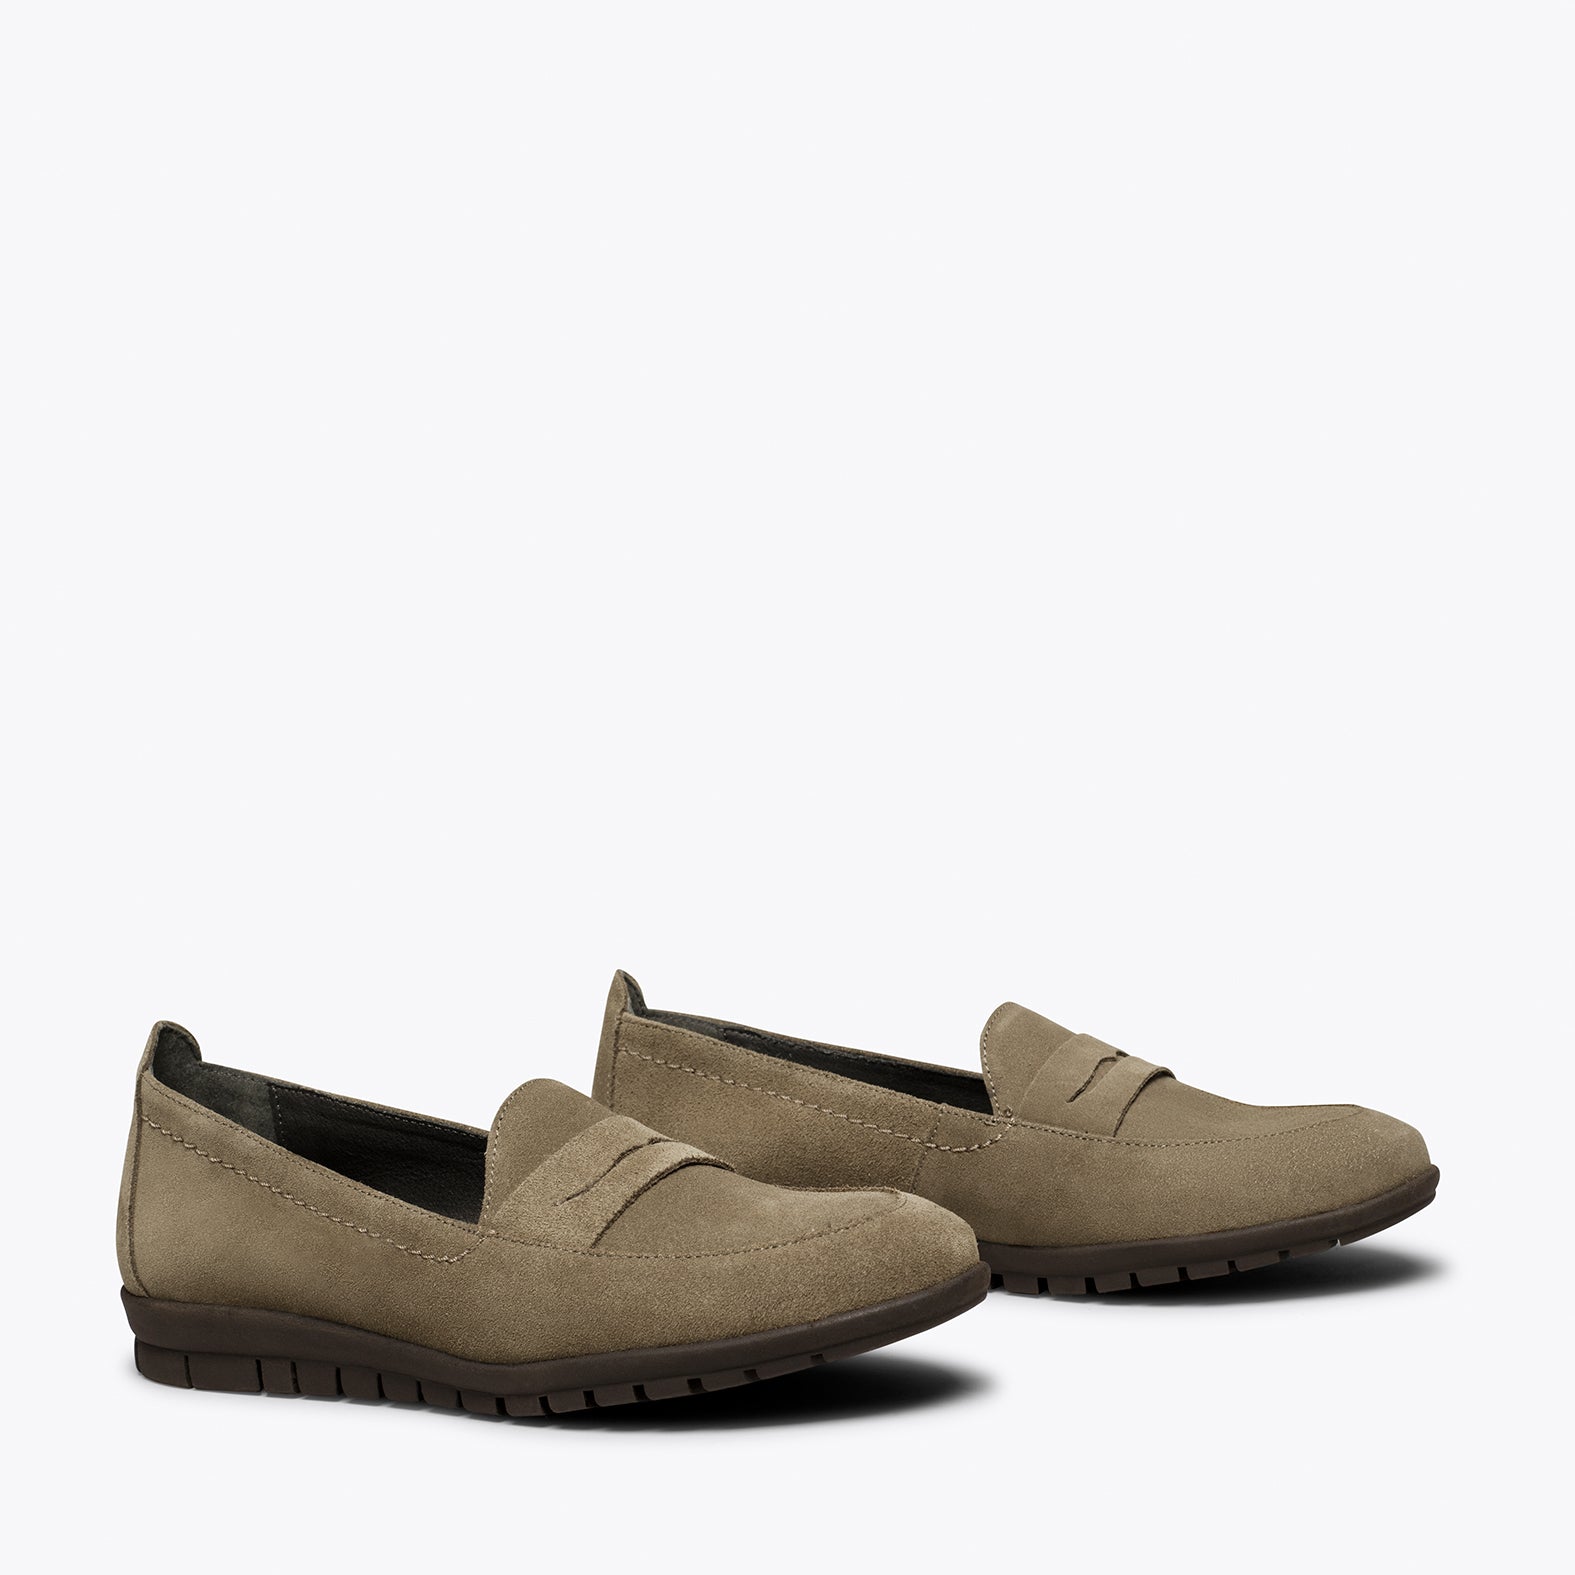 360 - TAUPE suede moccasin